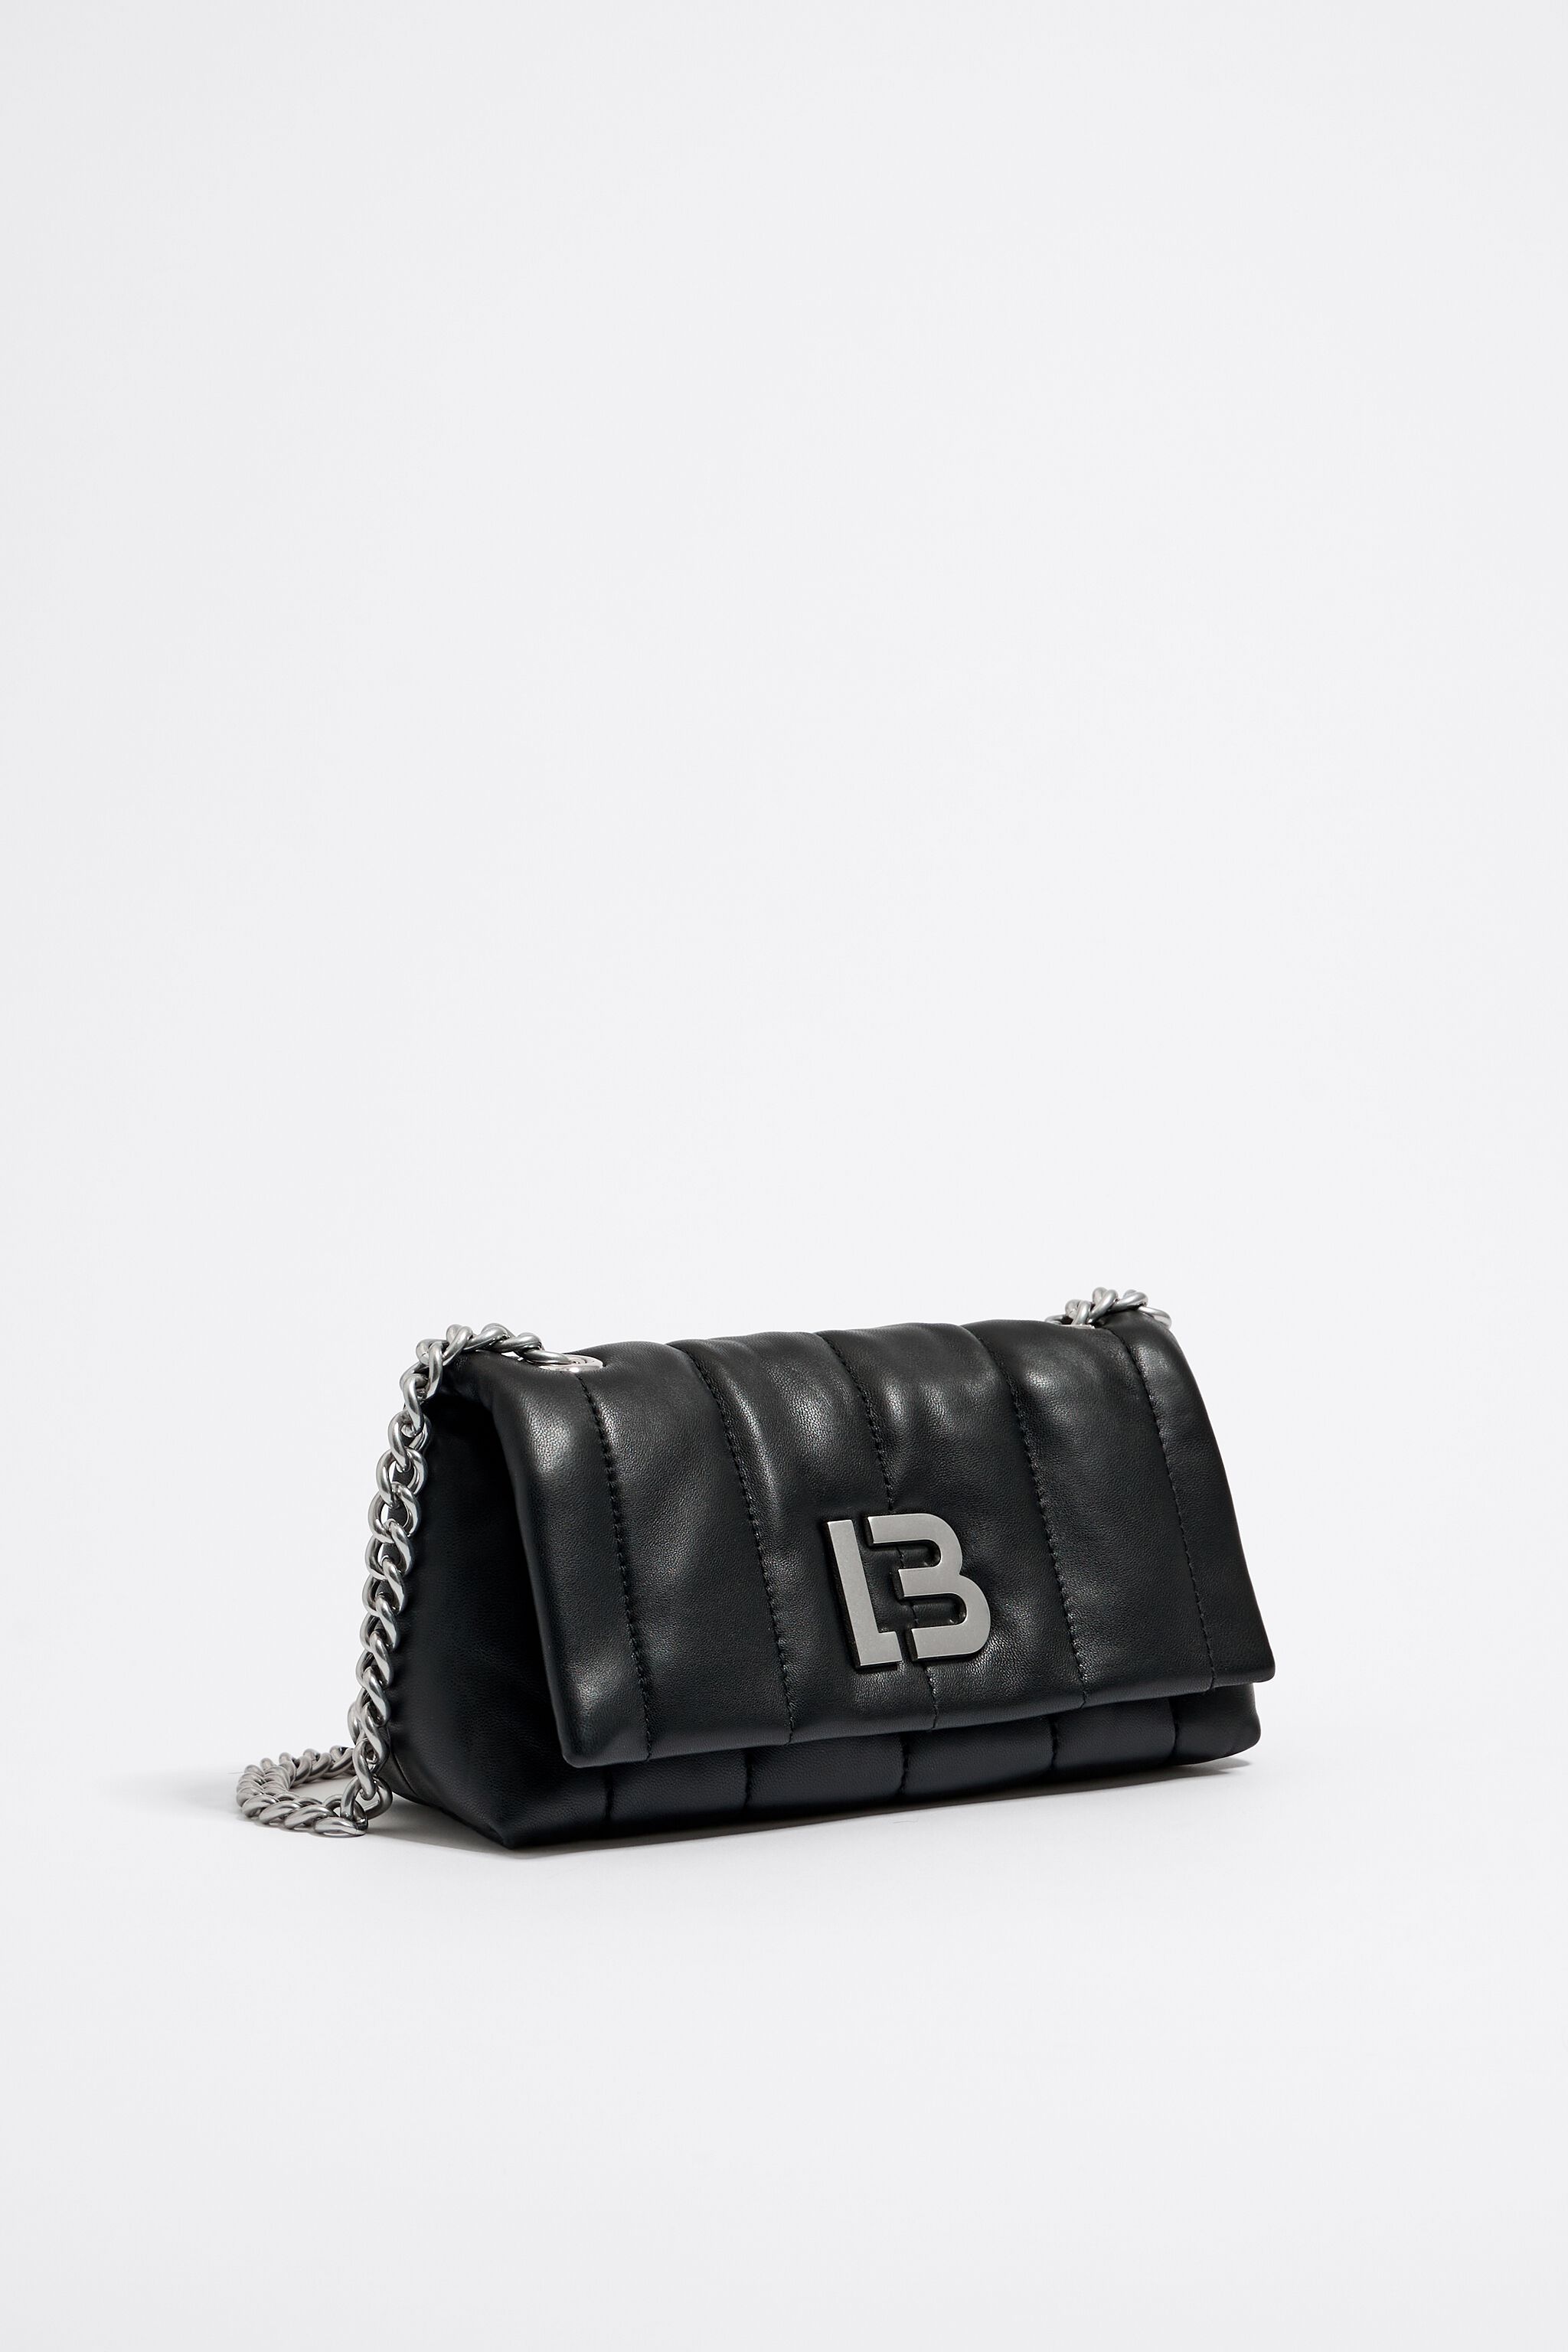 13 Bag by bimba y lola Stock Pictures, Editorial Images and Stock Photos |  Shutterstock